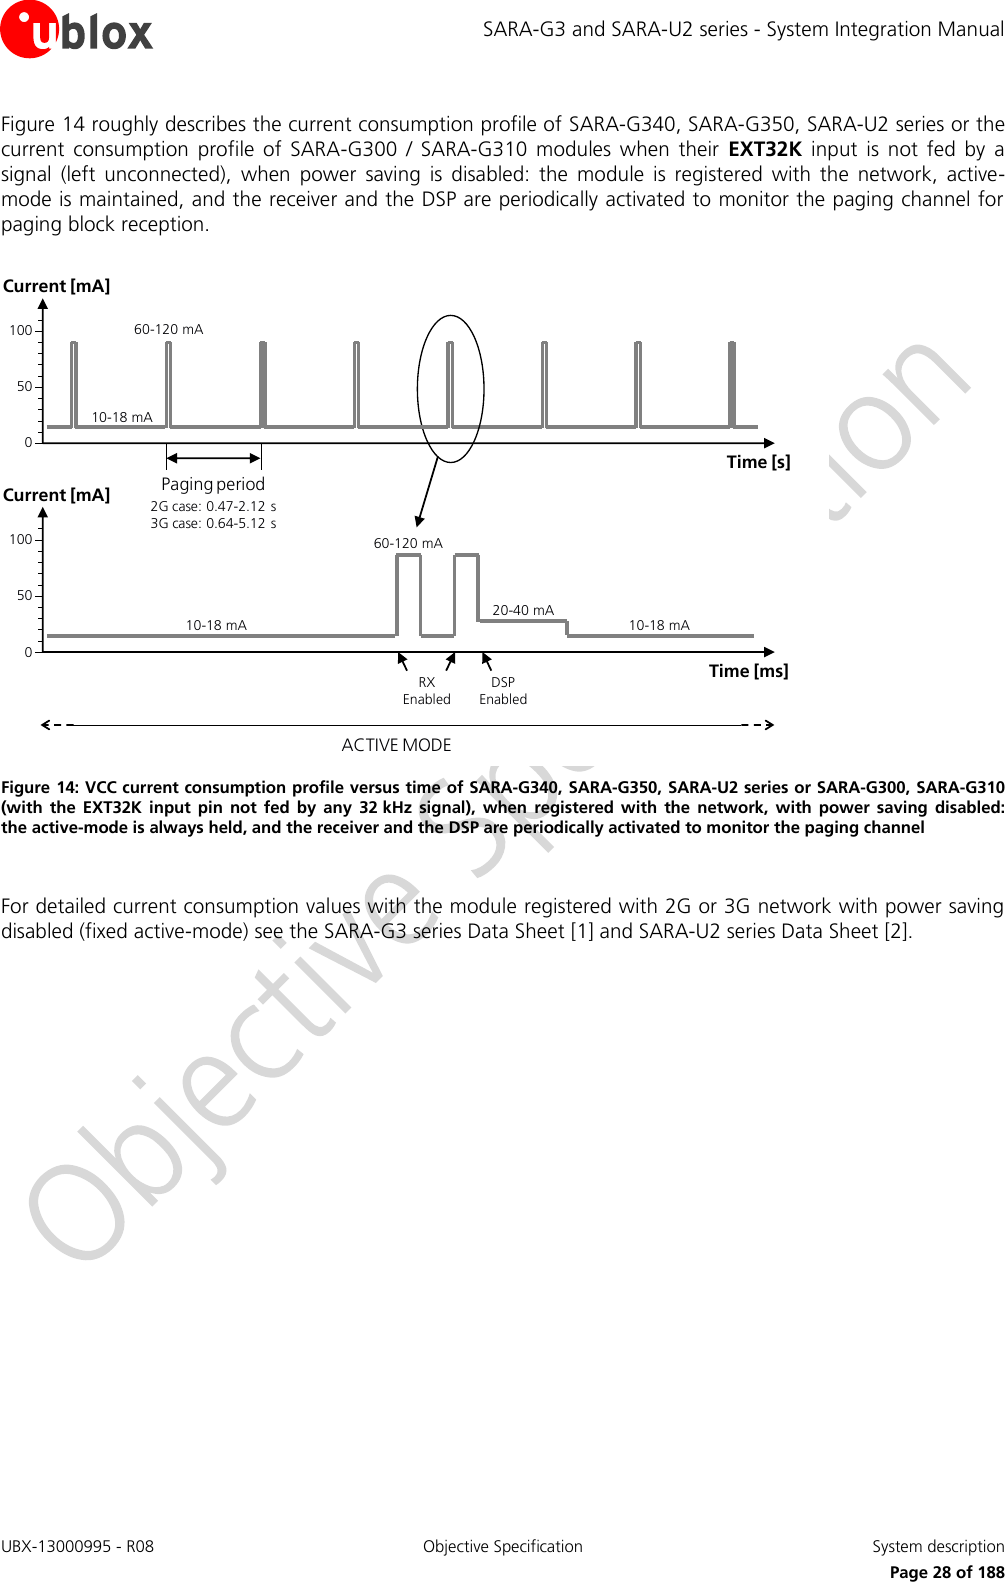 SARA-G3 and SARA-U2 series - System Integration Manual UBX-13000995 - R08  Objective Specification  System description     Page 28 of 188 Figure 14 roughly describes the current consumption profile of SARA-G340, SARA-G350, SARA-U2 series or the current  consumption  profile  of  SARA-G300  /  SARA-G310  modules  when  their  EXT32K  input  is  not  fed  by  a signal  (left  unconnected),  when  power  saving  is  disabled:  the  module  is  registered  with  the  network,  active-mode is maintained, and the receiver and the DSP are periodically activated to monitor the paging channel for paging block reception.  ACTIVE MODE10-18 mA60-120 mA2G case: 0.47-2.12 s    3G case: 0.64-5.12 sPaging periodTime [s]Current [mA]100500Time [ms]Current [mA]10050010-18 mA60-120 mARX Enabled20-40 mADSP Enabled10-18 mA Figure 14: VCC current consumption profile versus time of SARA-G340, SARA-G350, SARA-U2 series or SARA-G300, SARA-G310 (with  the  EXT32K  input  pin  not  fed  by  any  32 kHz  signal),  when  registered  with  the  network, with  power  saving  disabled:  the active-mode is always held, and the receiver and the DSP are periodically activated to monitor the paging channel  For detailed current consumption values with the module registered with 2G or 3G network with power saving disabled (fixed active-mode) see the SARA-G3 series Data Sheet [1] and SARA-U2 series Data Sheet [2].  